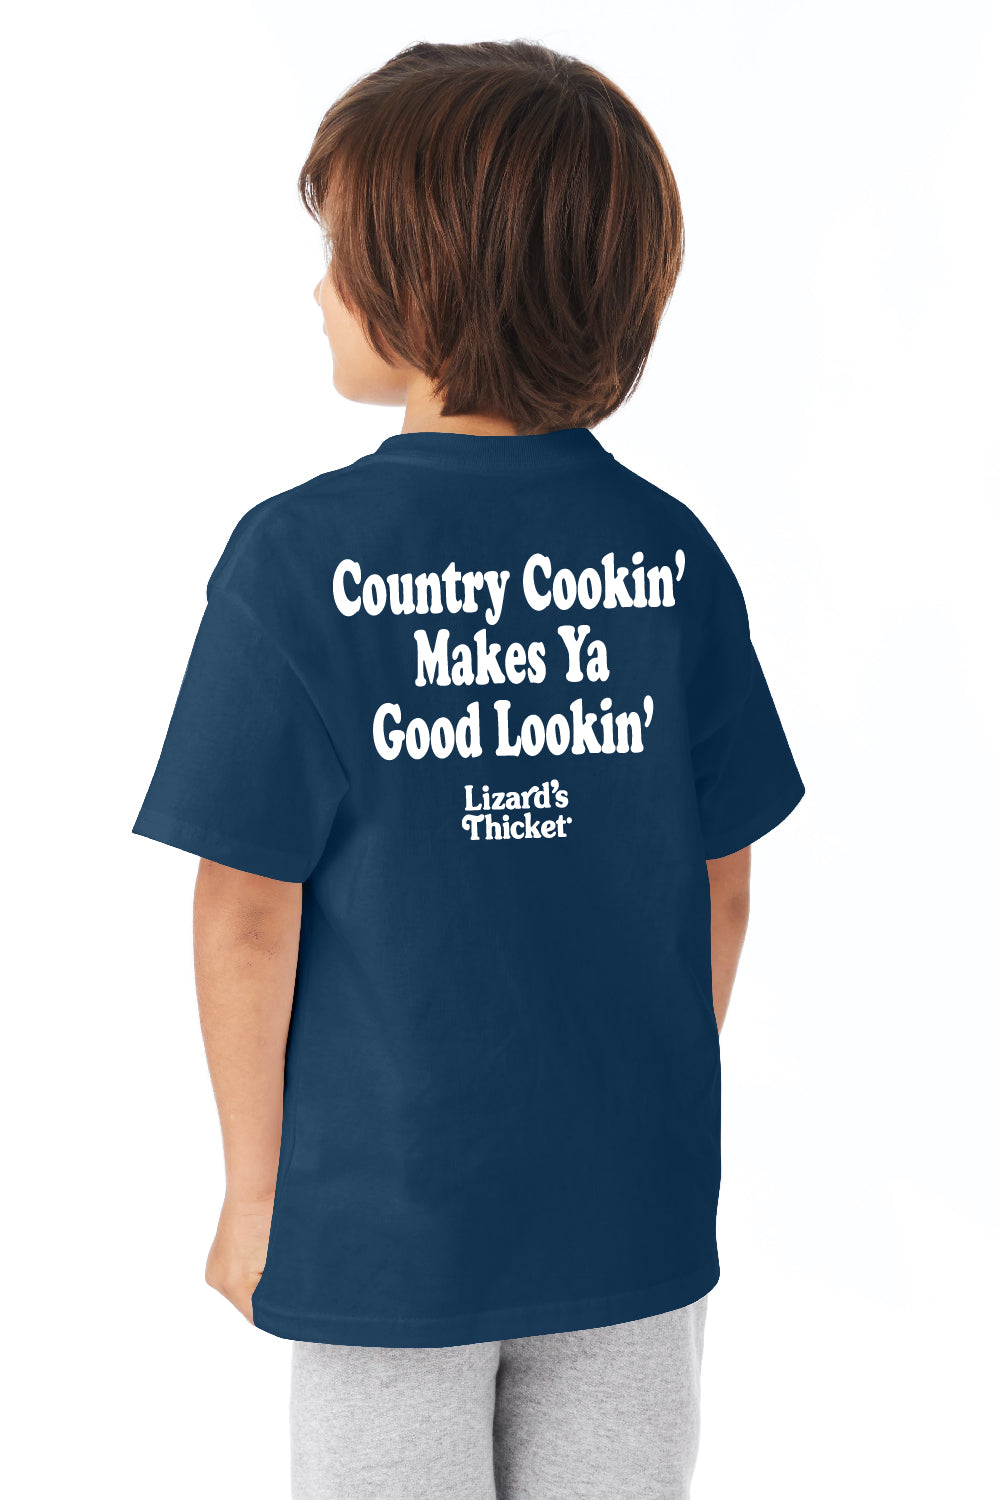 Lizard’s Thicket Youth T-Shirt